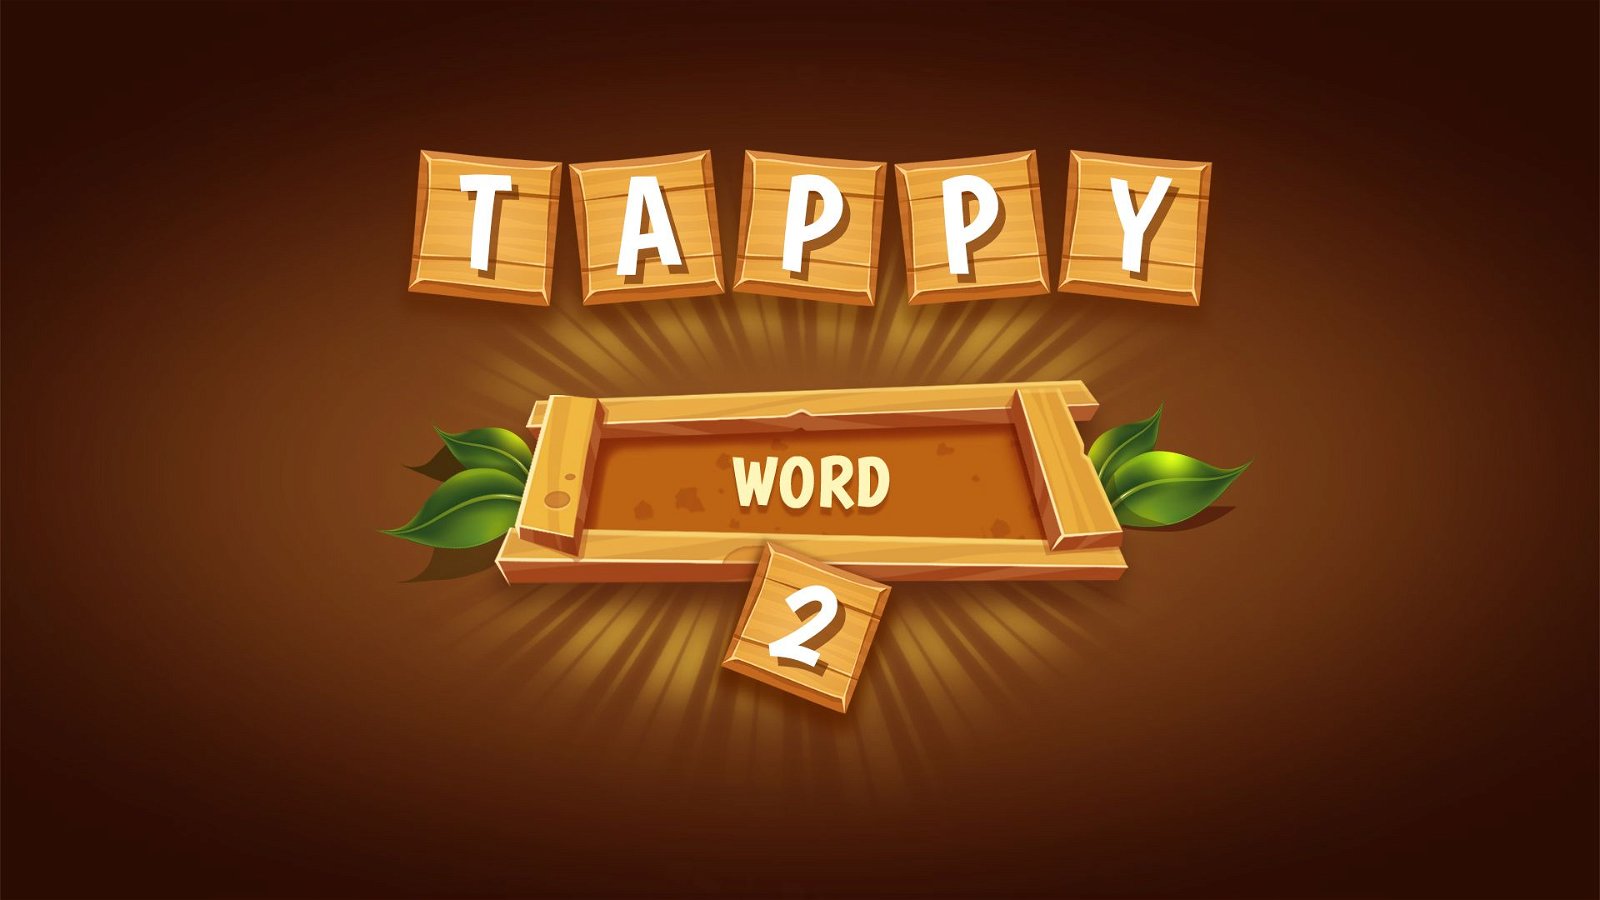 Image of Tappy Word 2